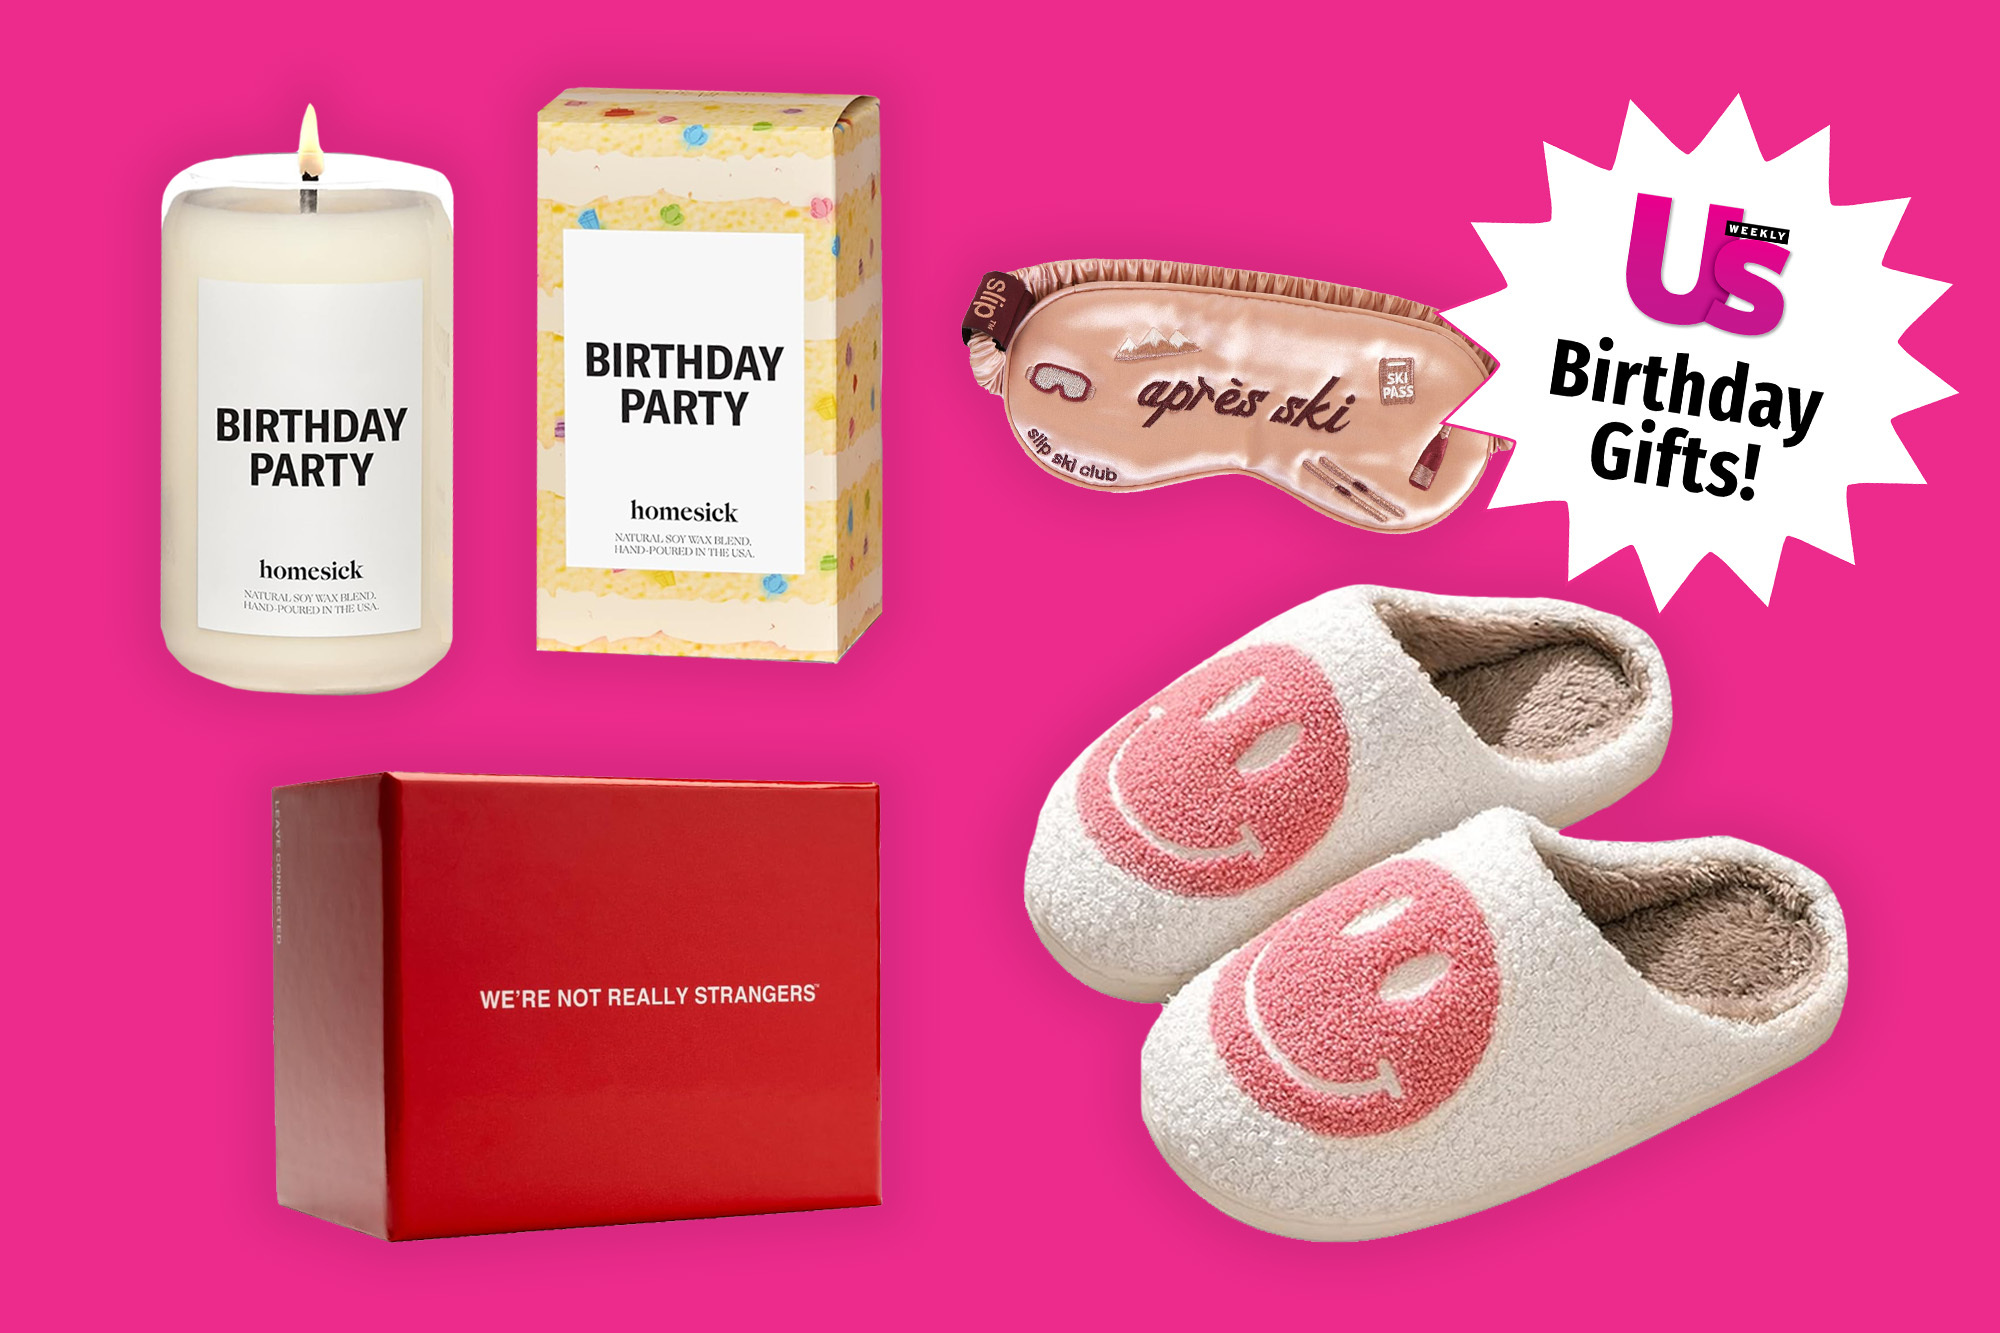 Gift Guide: 20 Gifts For Your Best Friend | MomsWhoSave.com